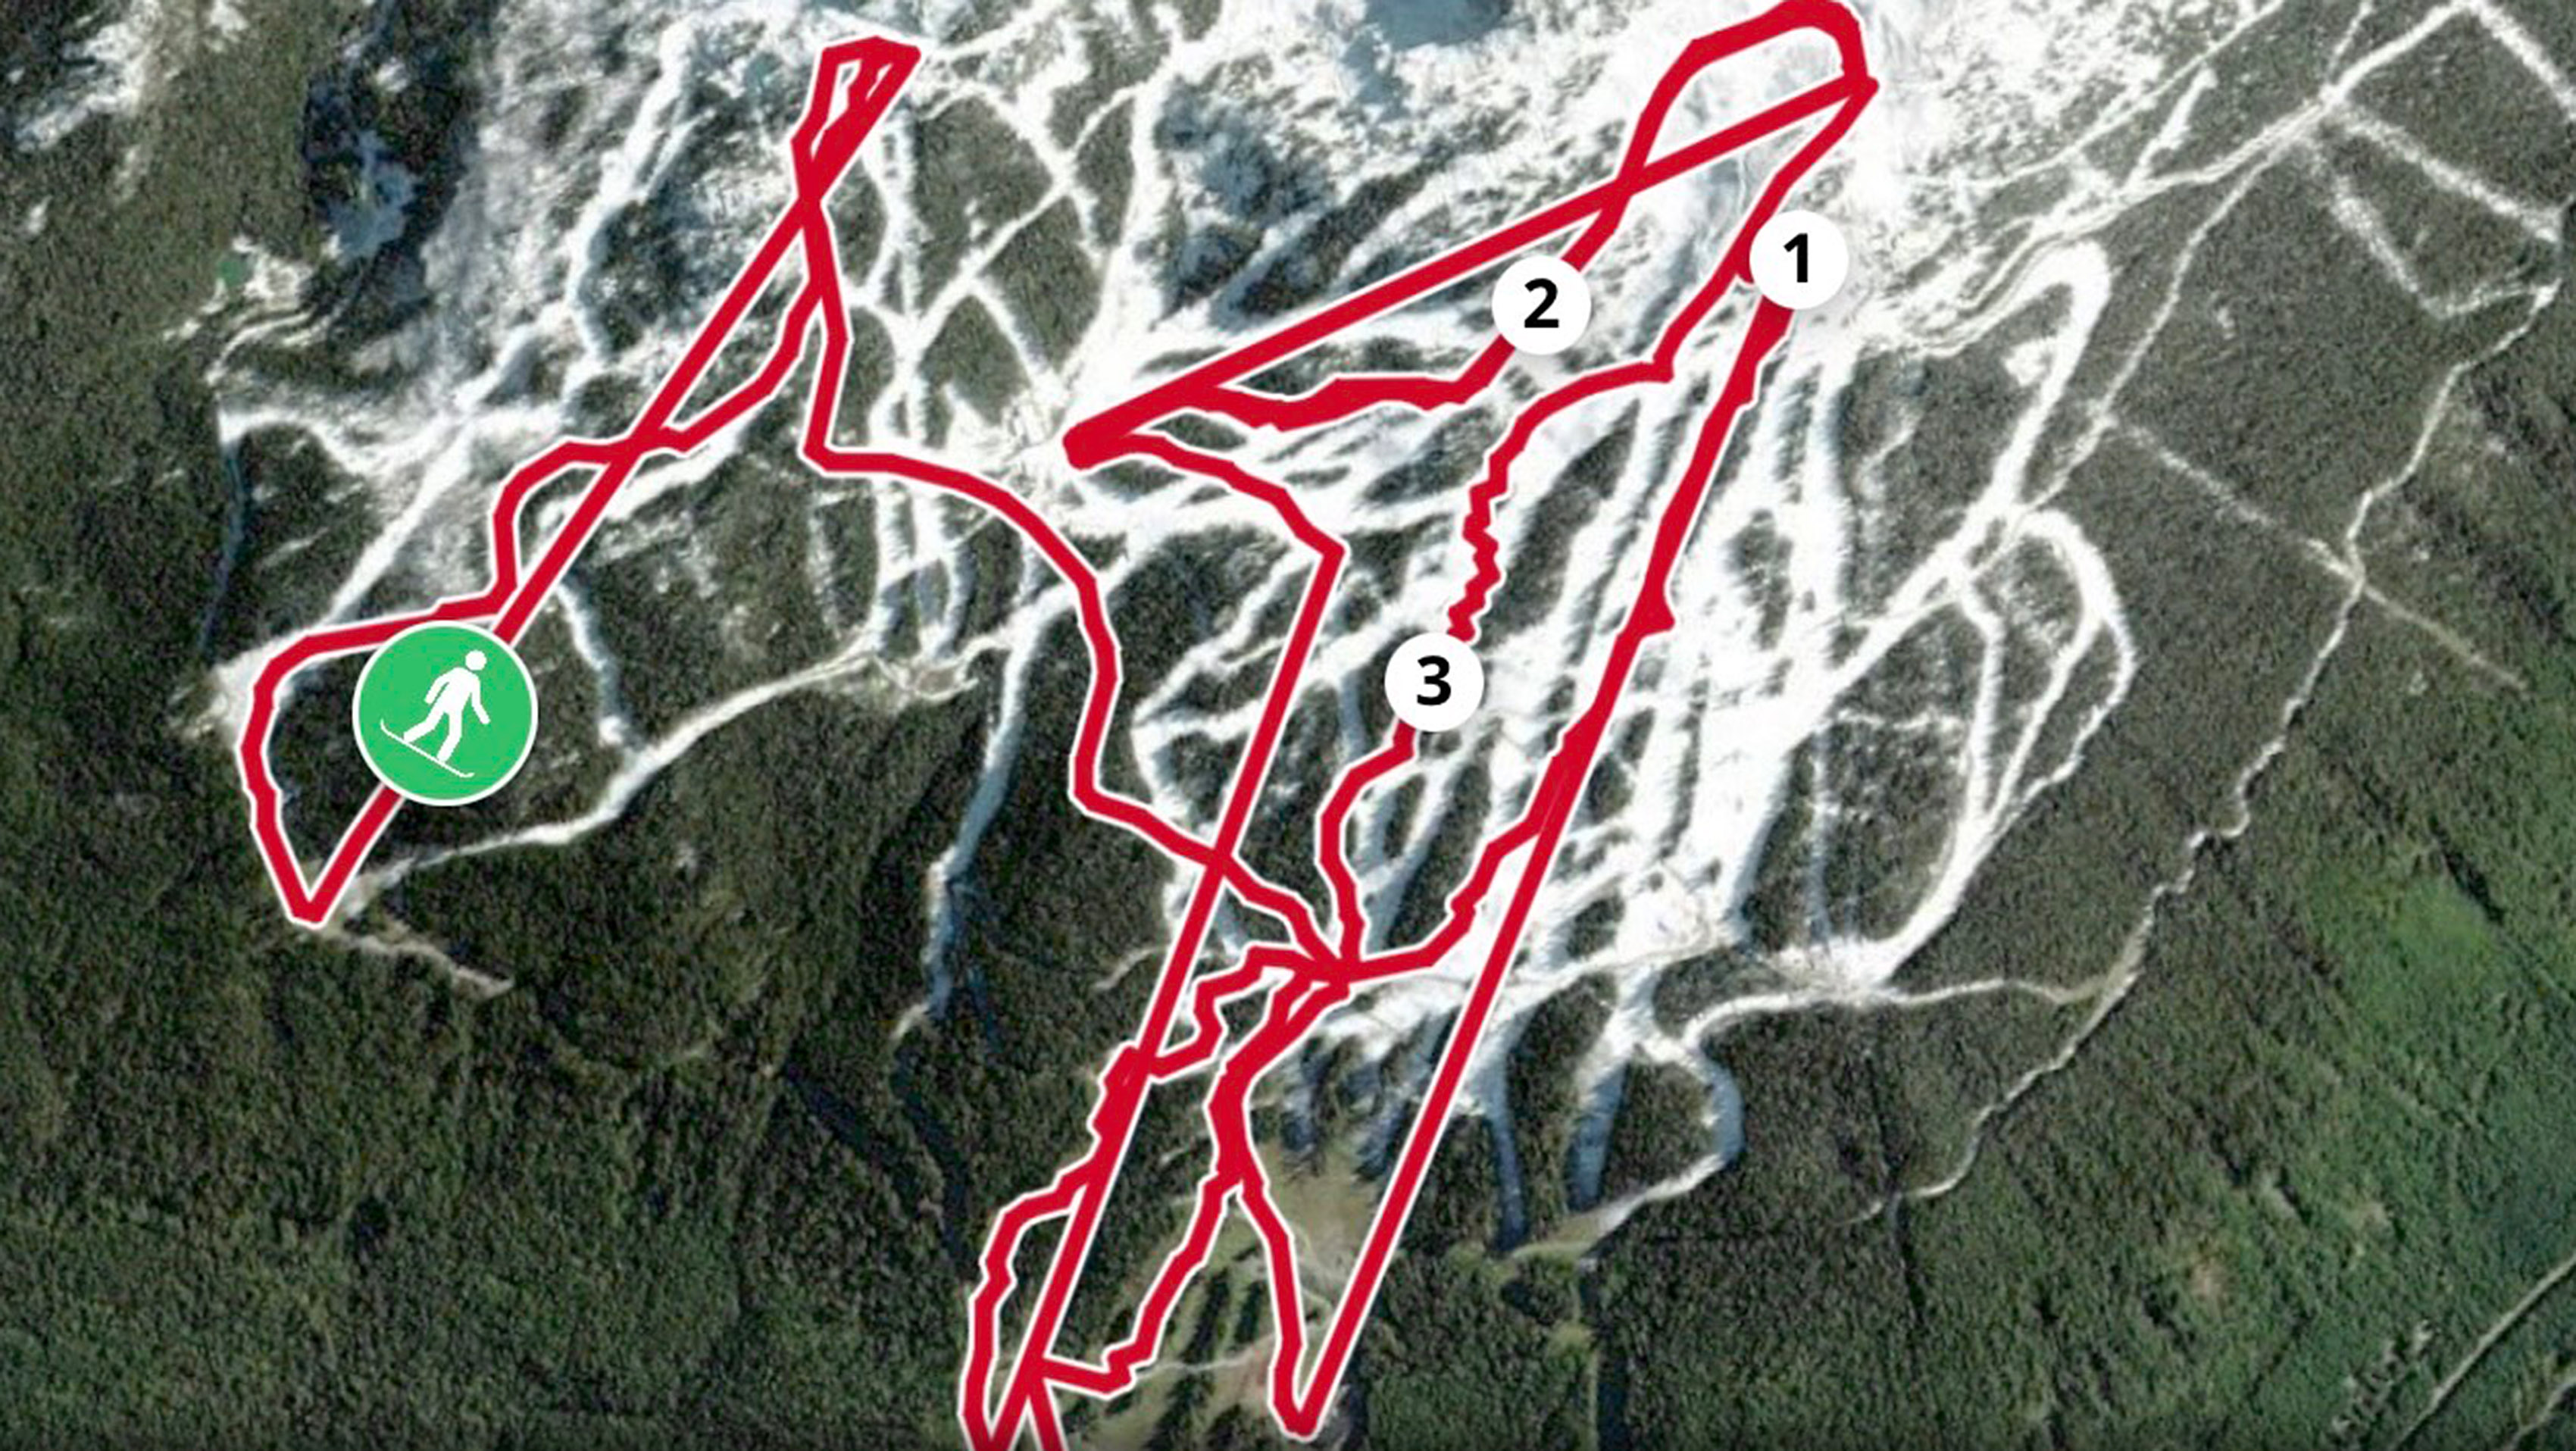 Apple Maps with snowboard route shown in red.